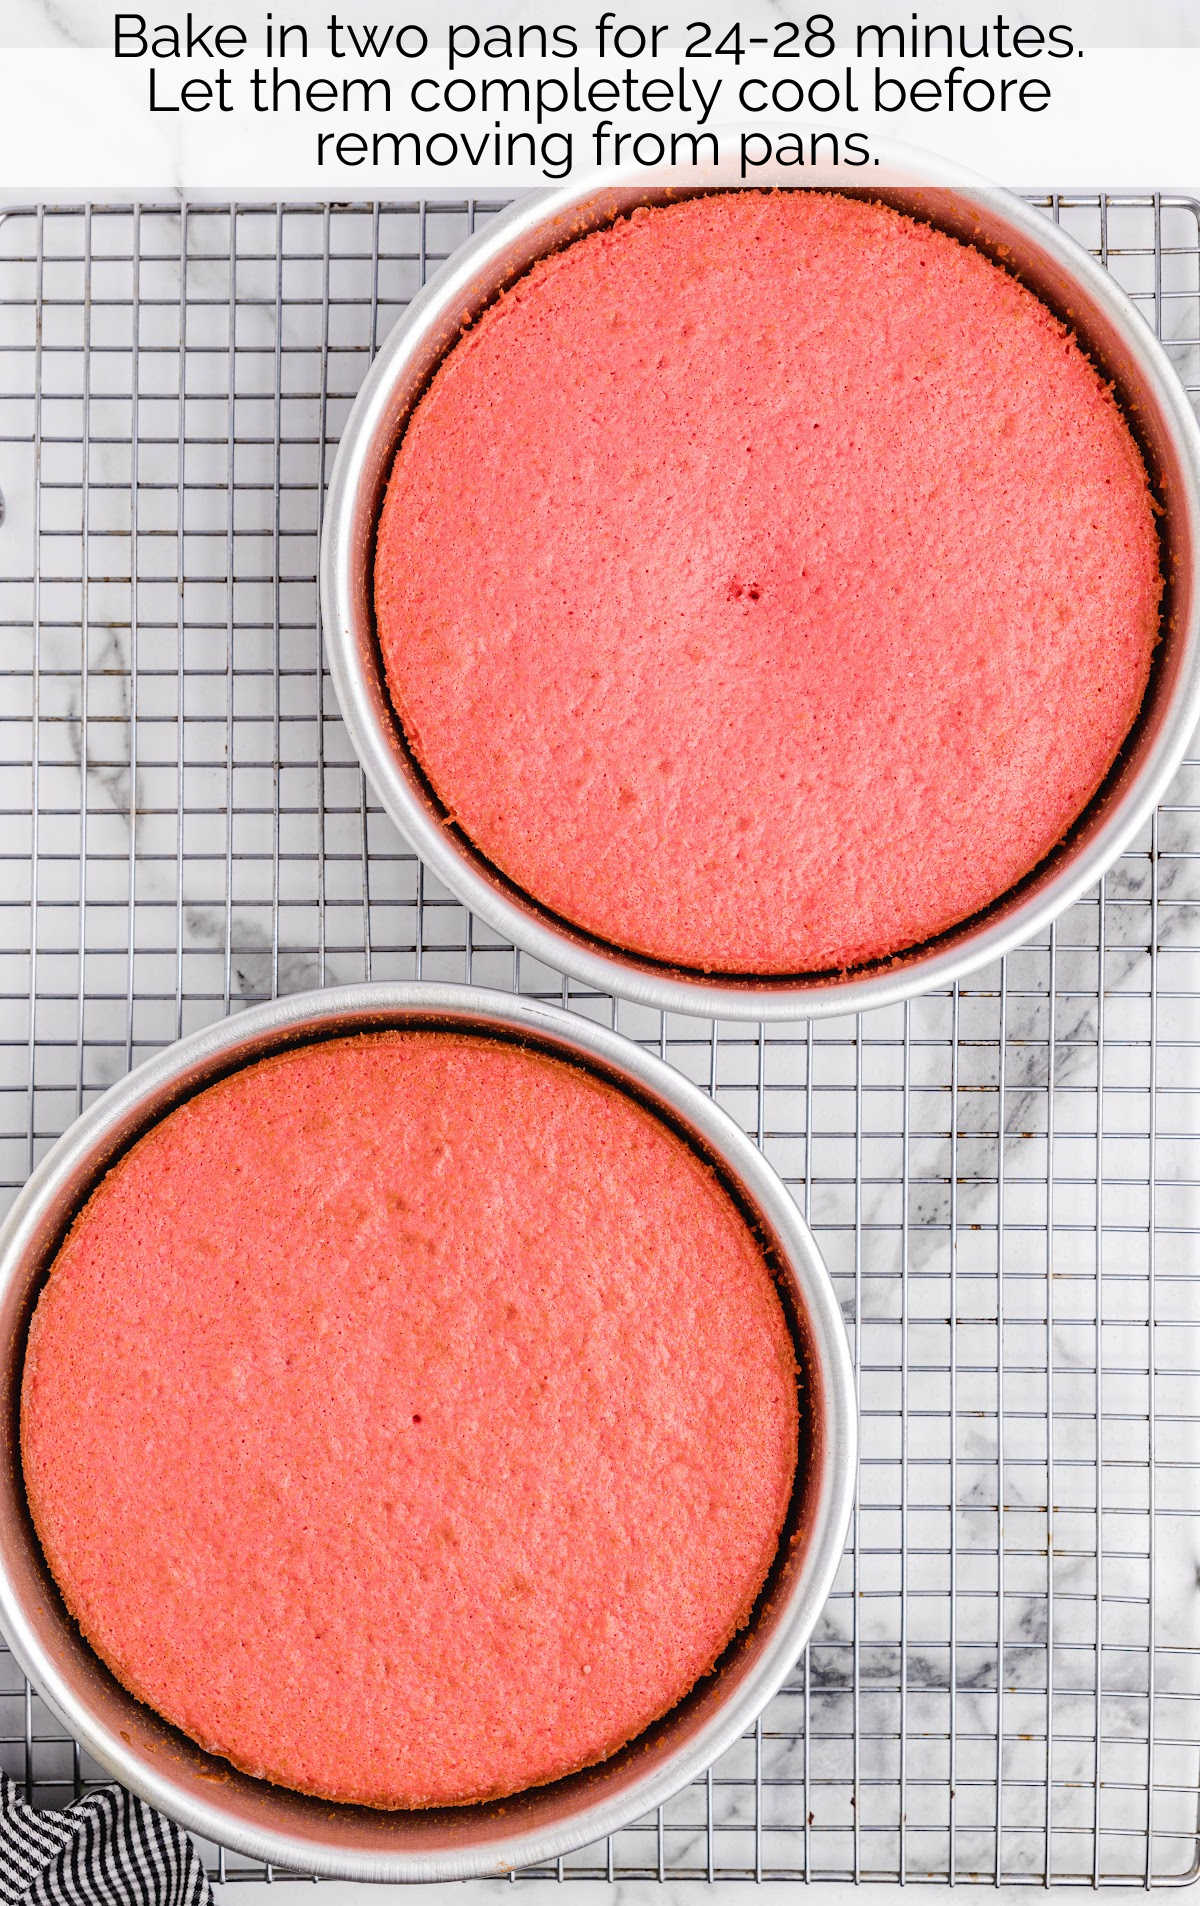 strawberry cake baked in two pans